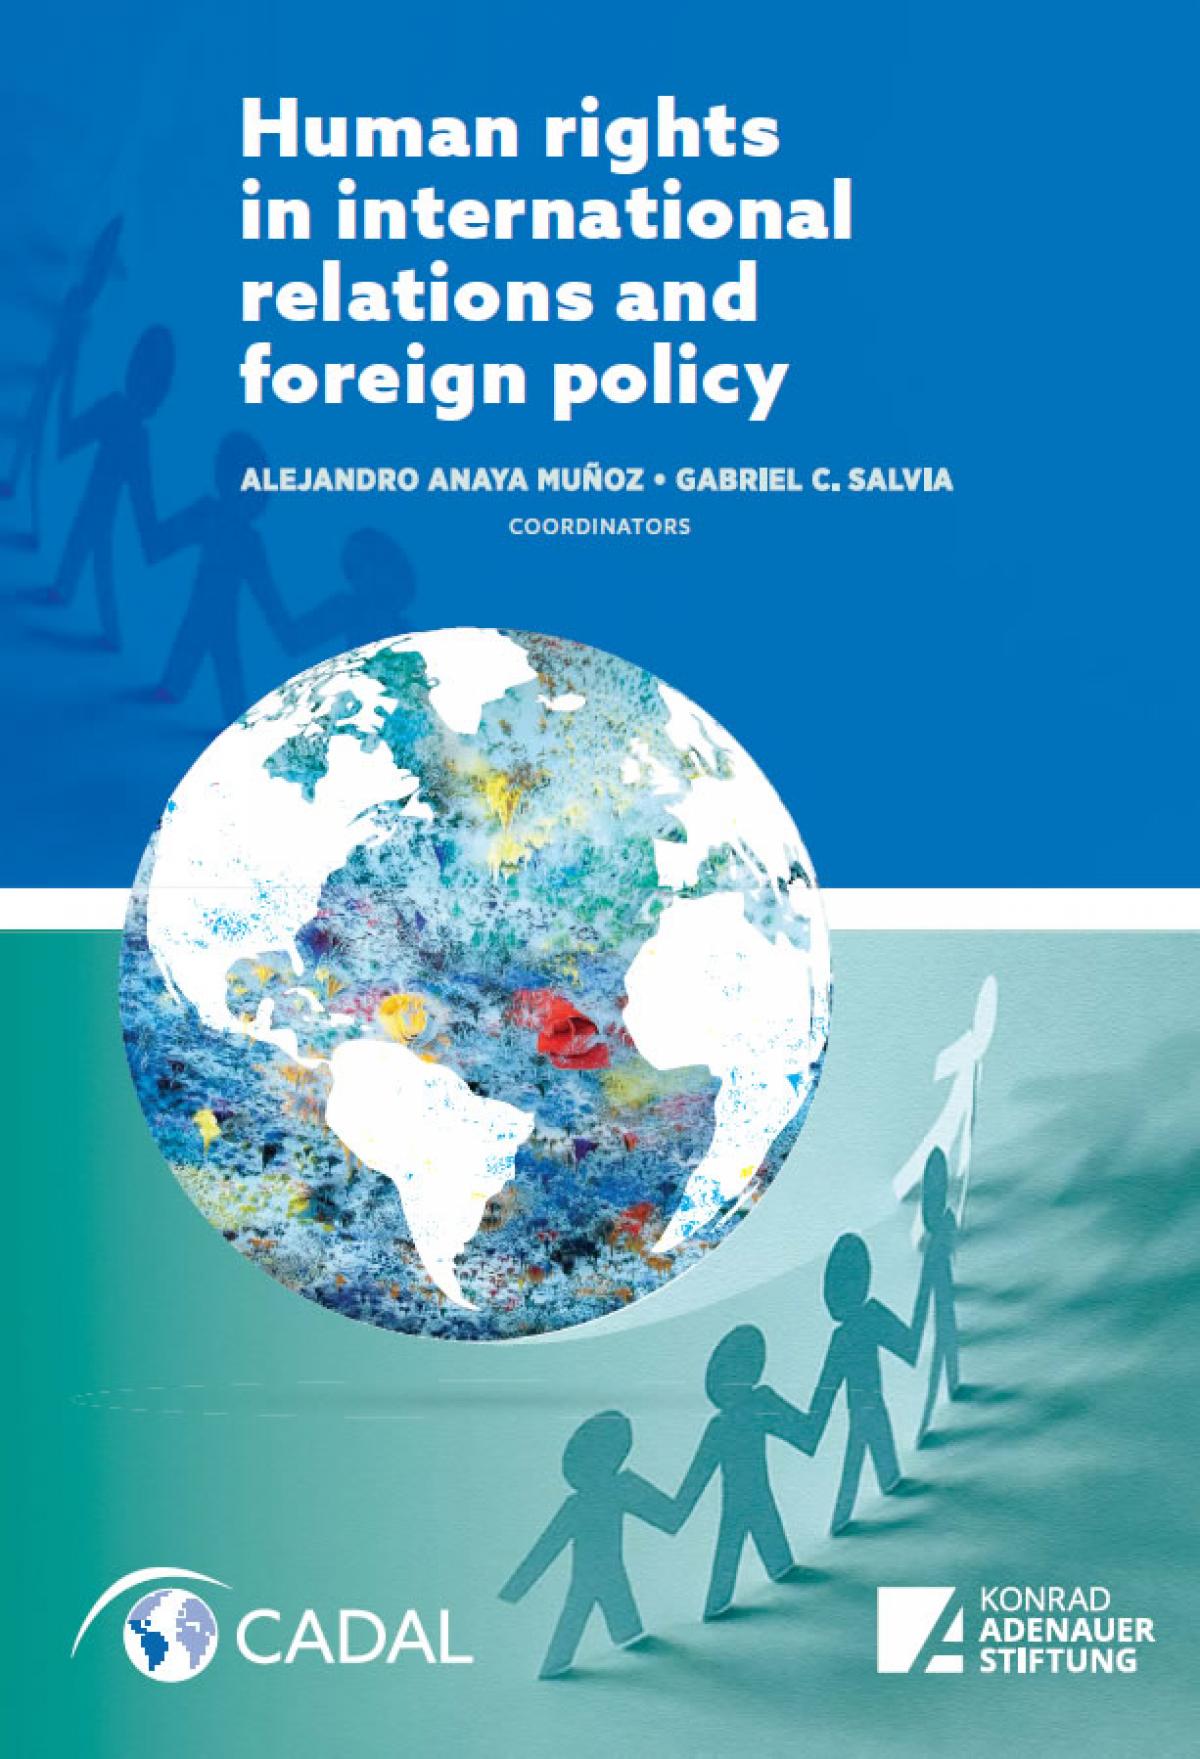 Human rights in international relations and foreign policy